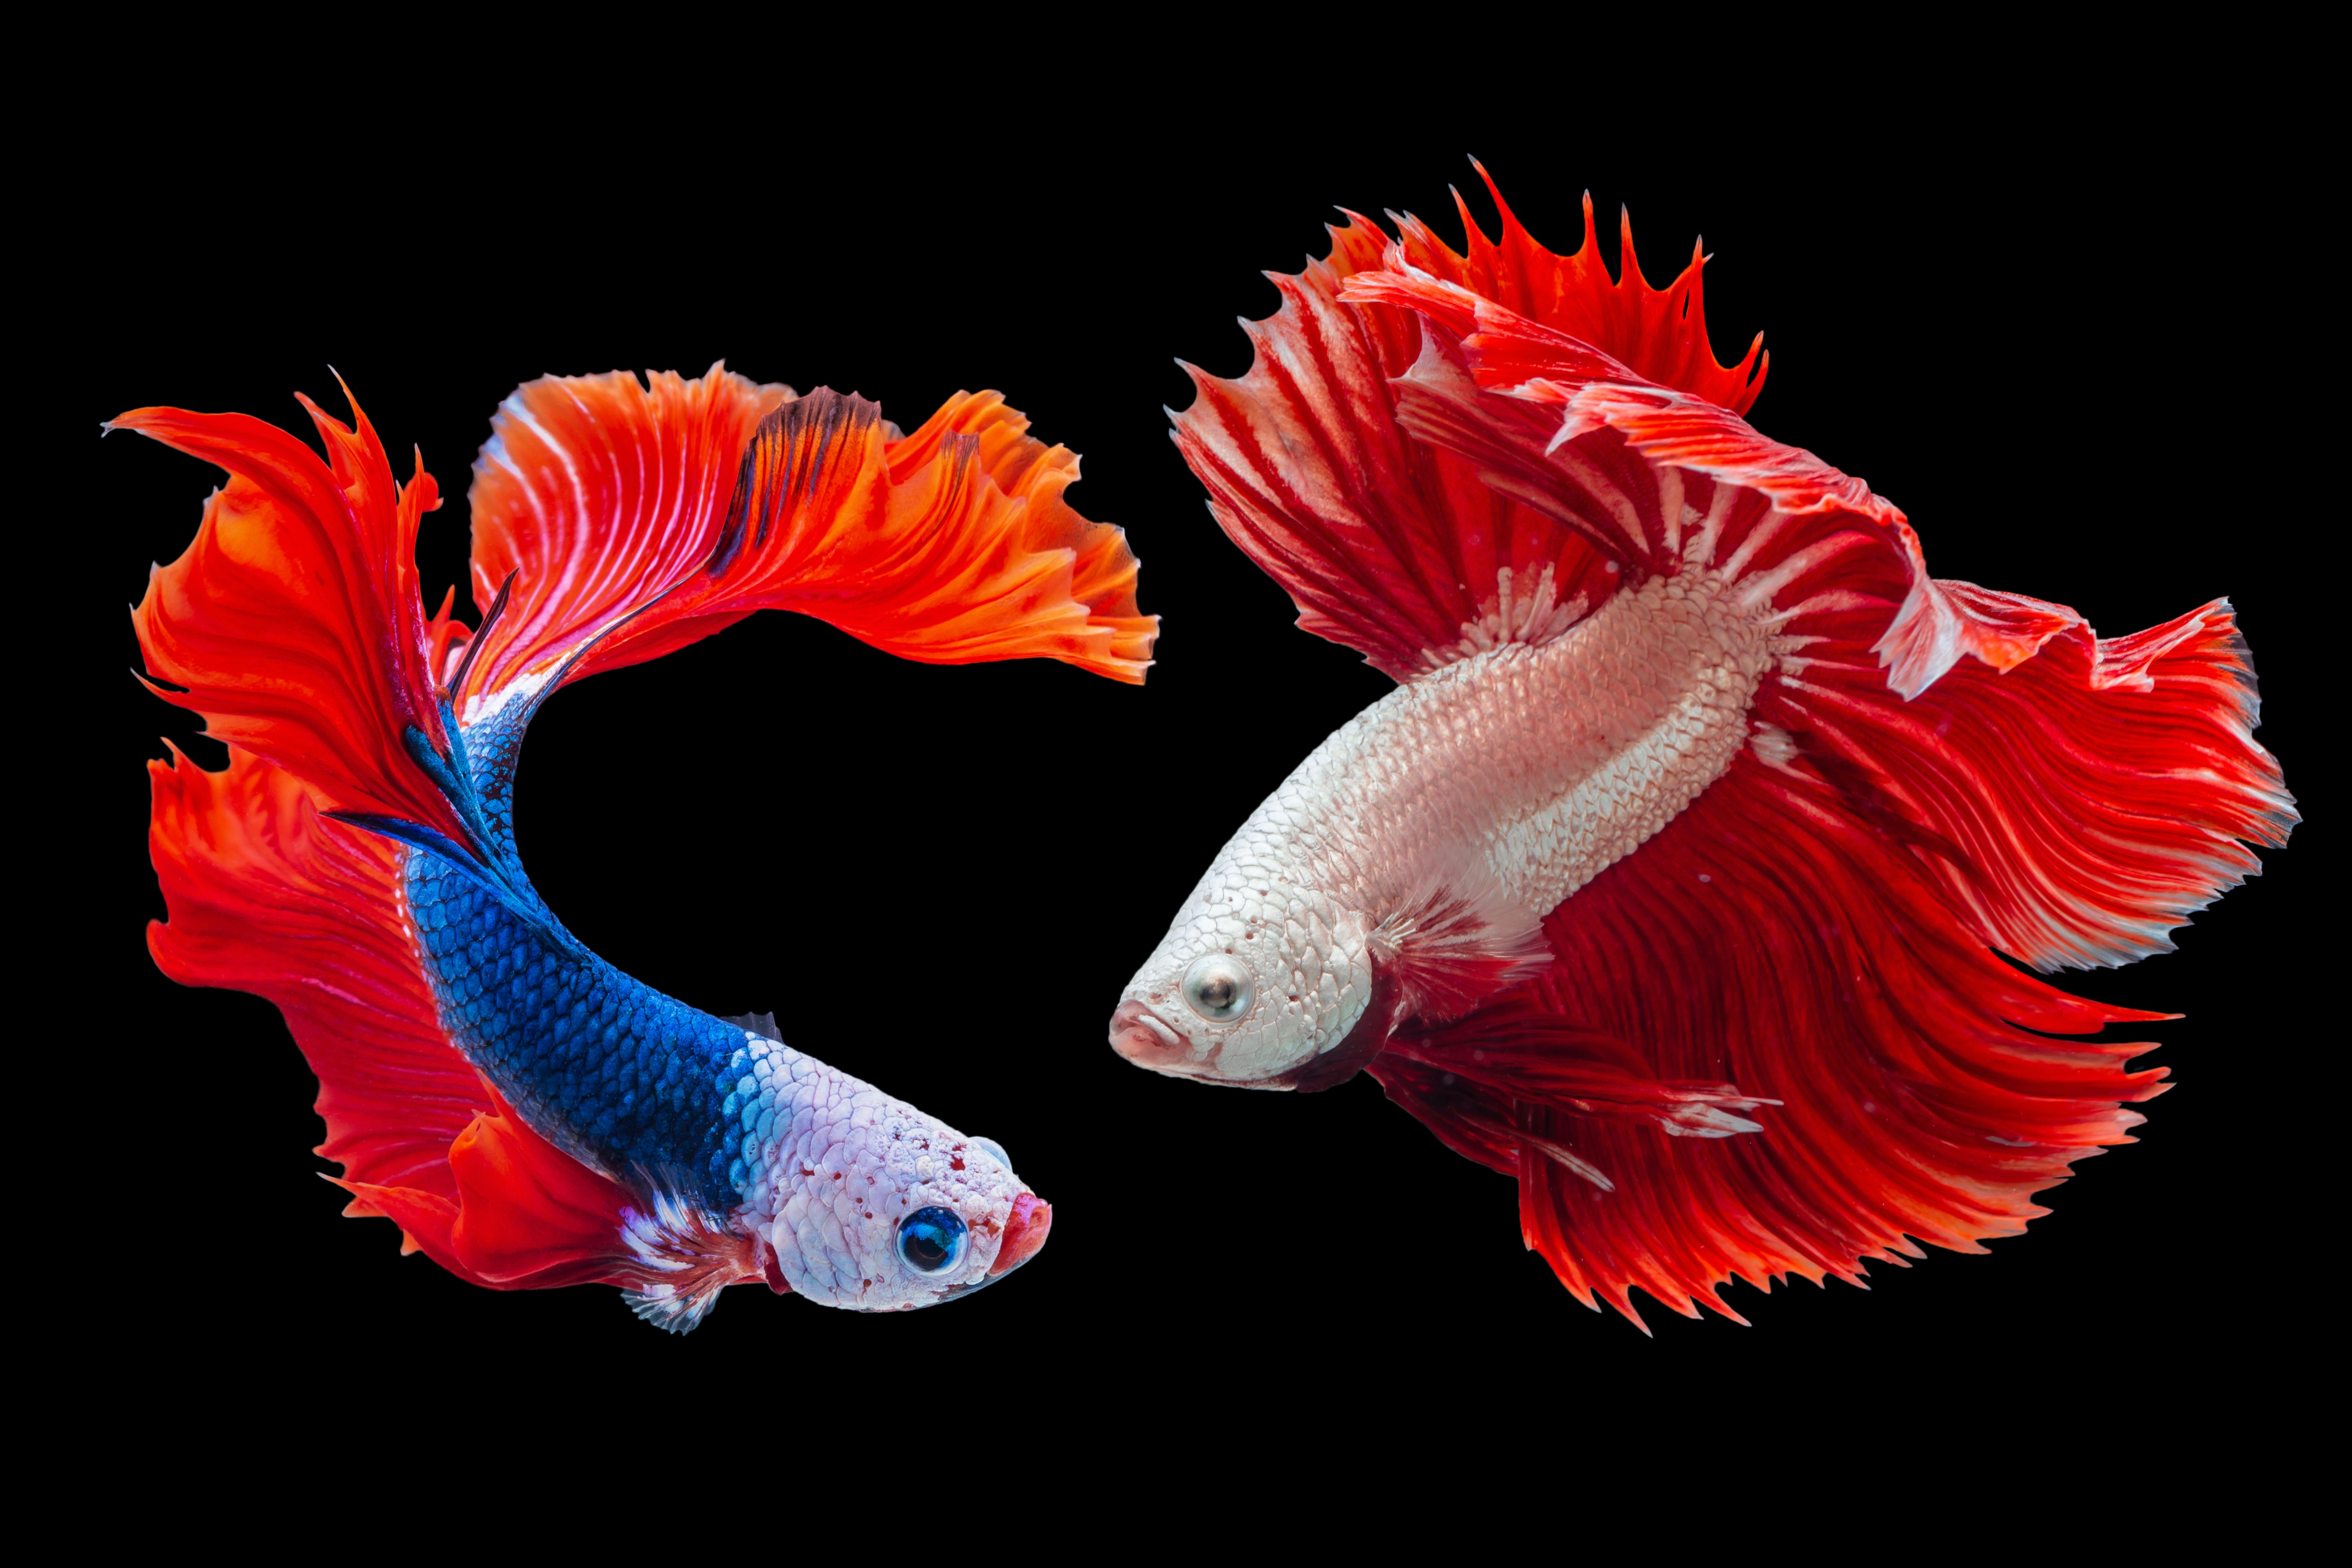 Photograph of two fish swirling around each other.